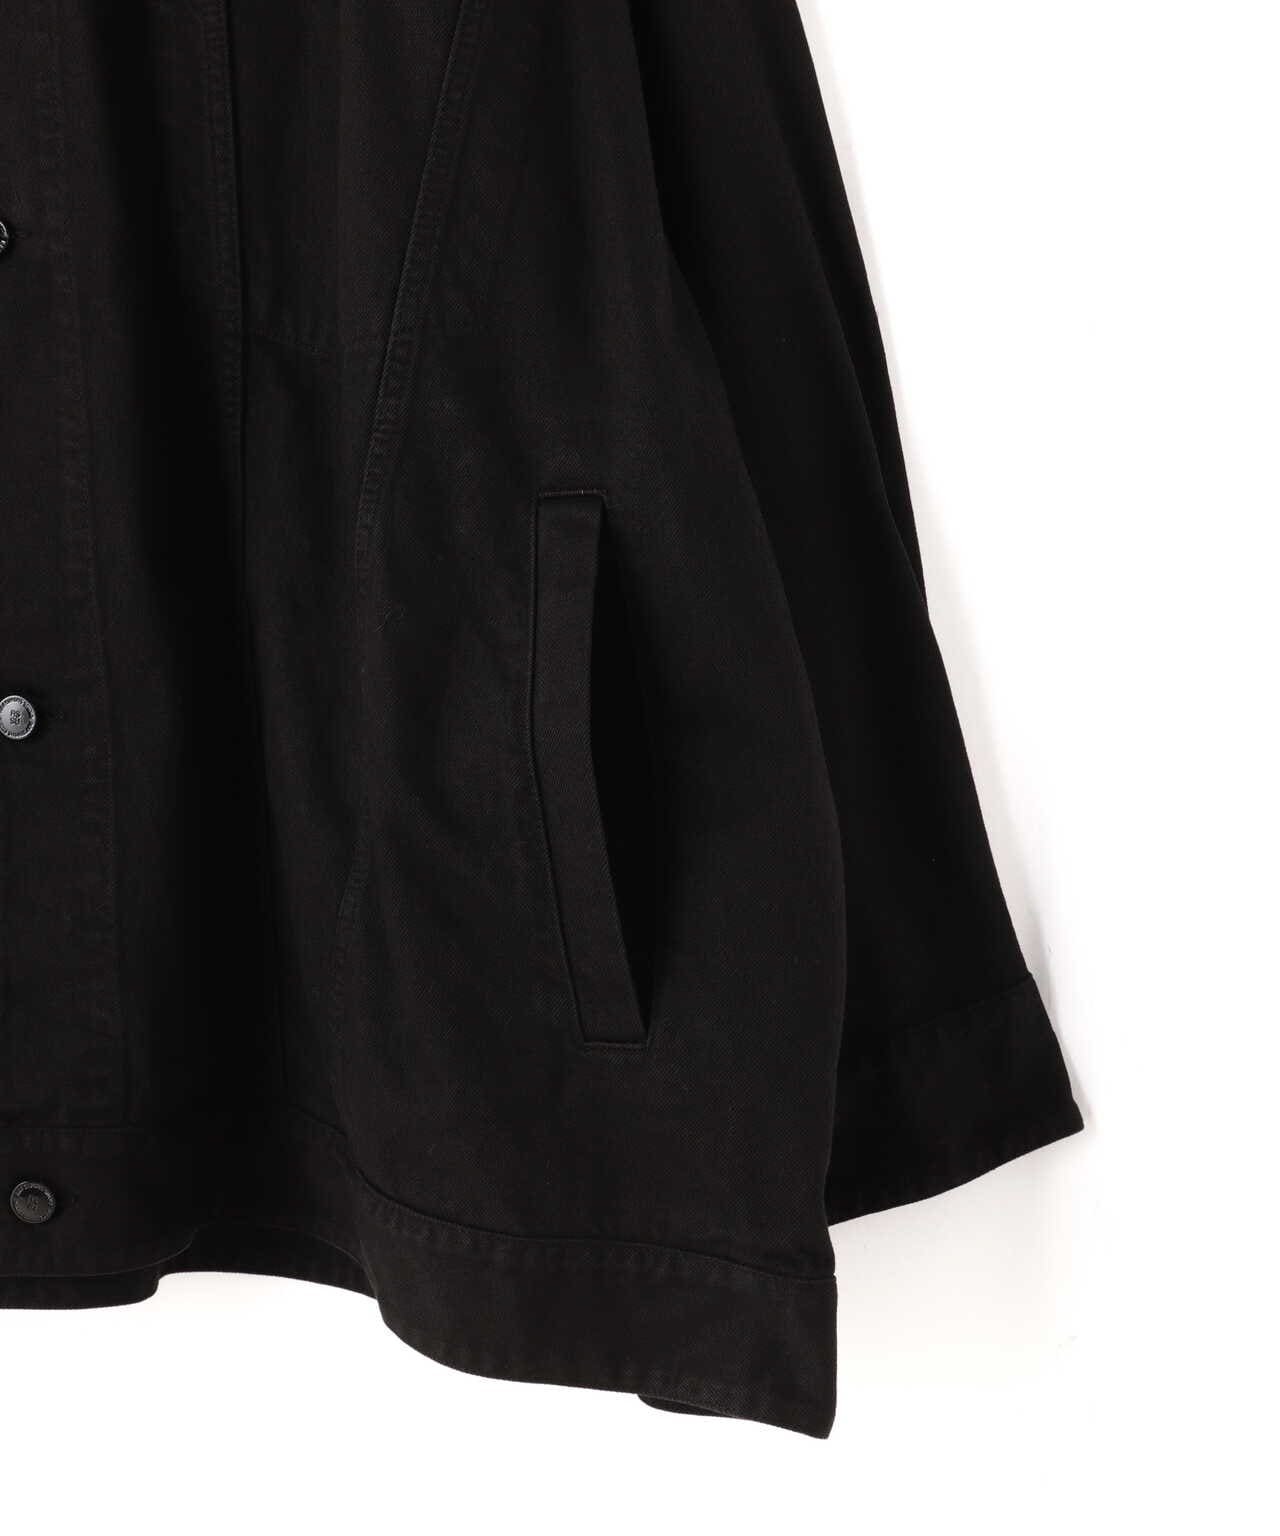 RAF SIMONS/ラフシモンズ/Denim Jacket With Leather Patch | LHP 